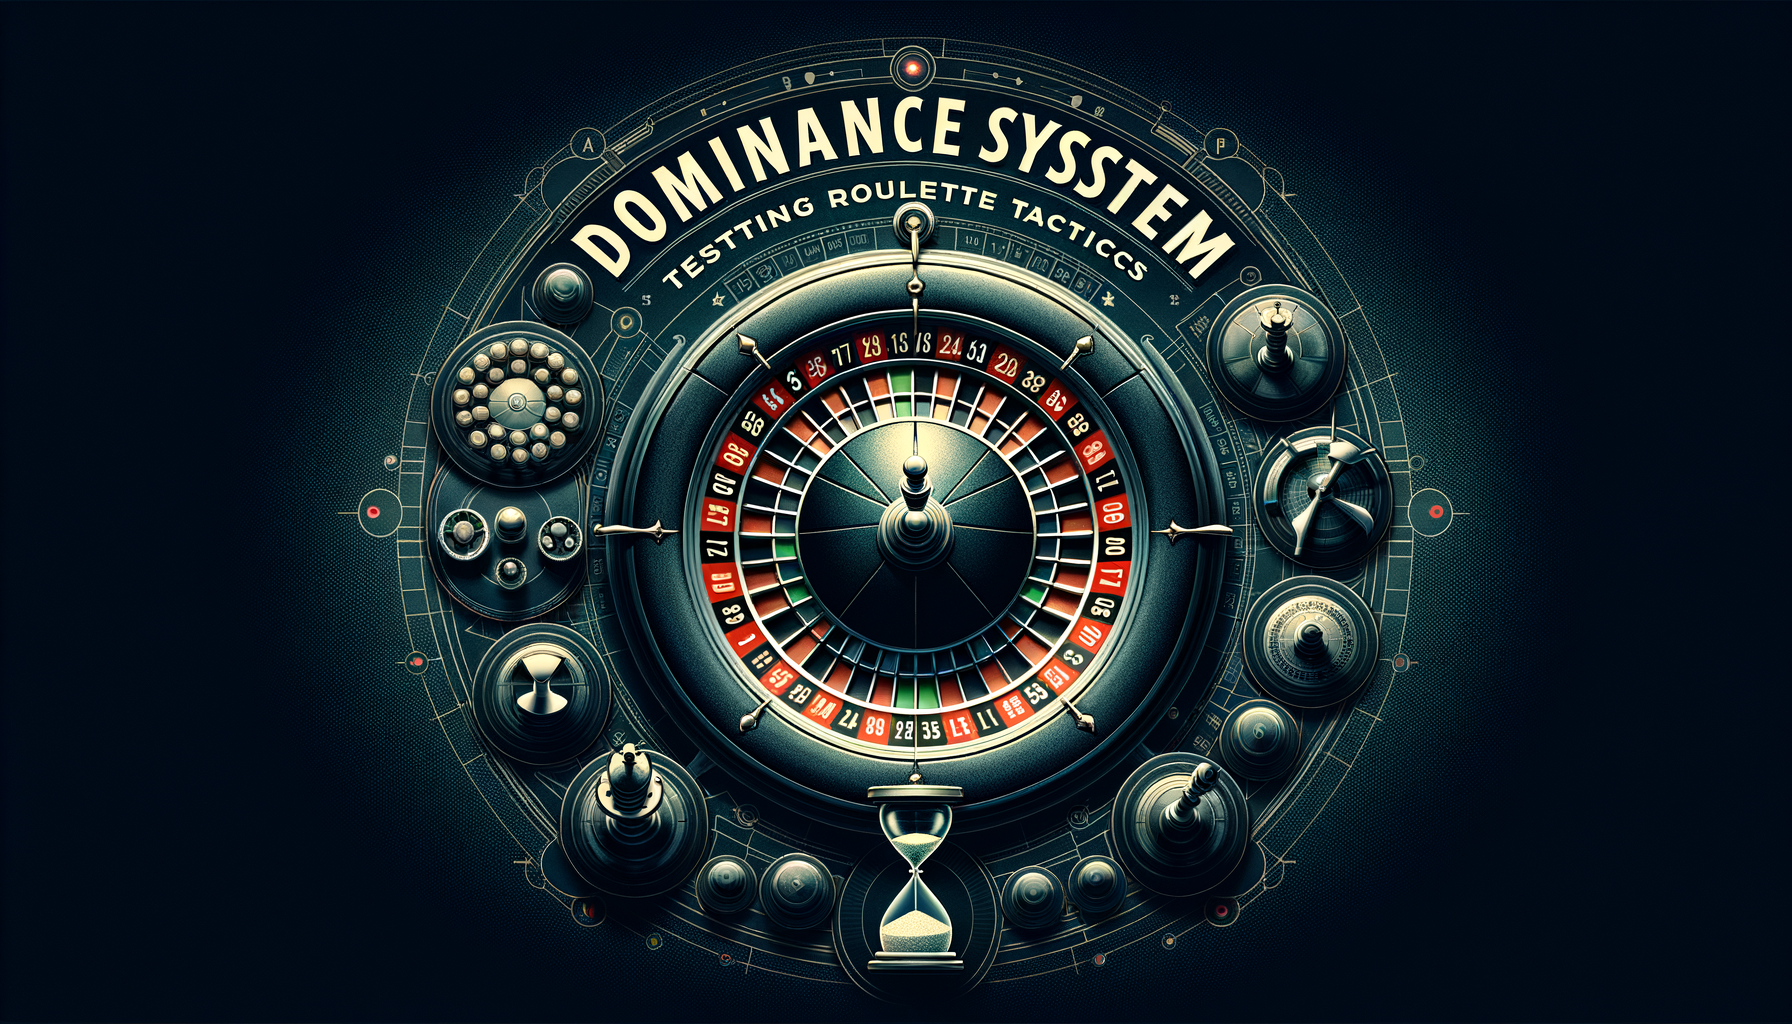 Dominance System: Testing Roulette Tactics